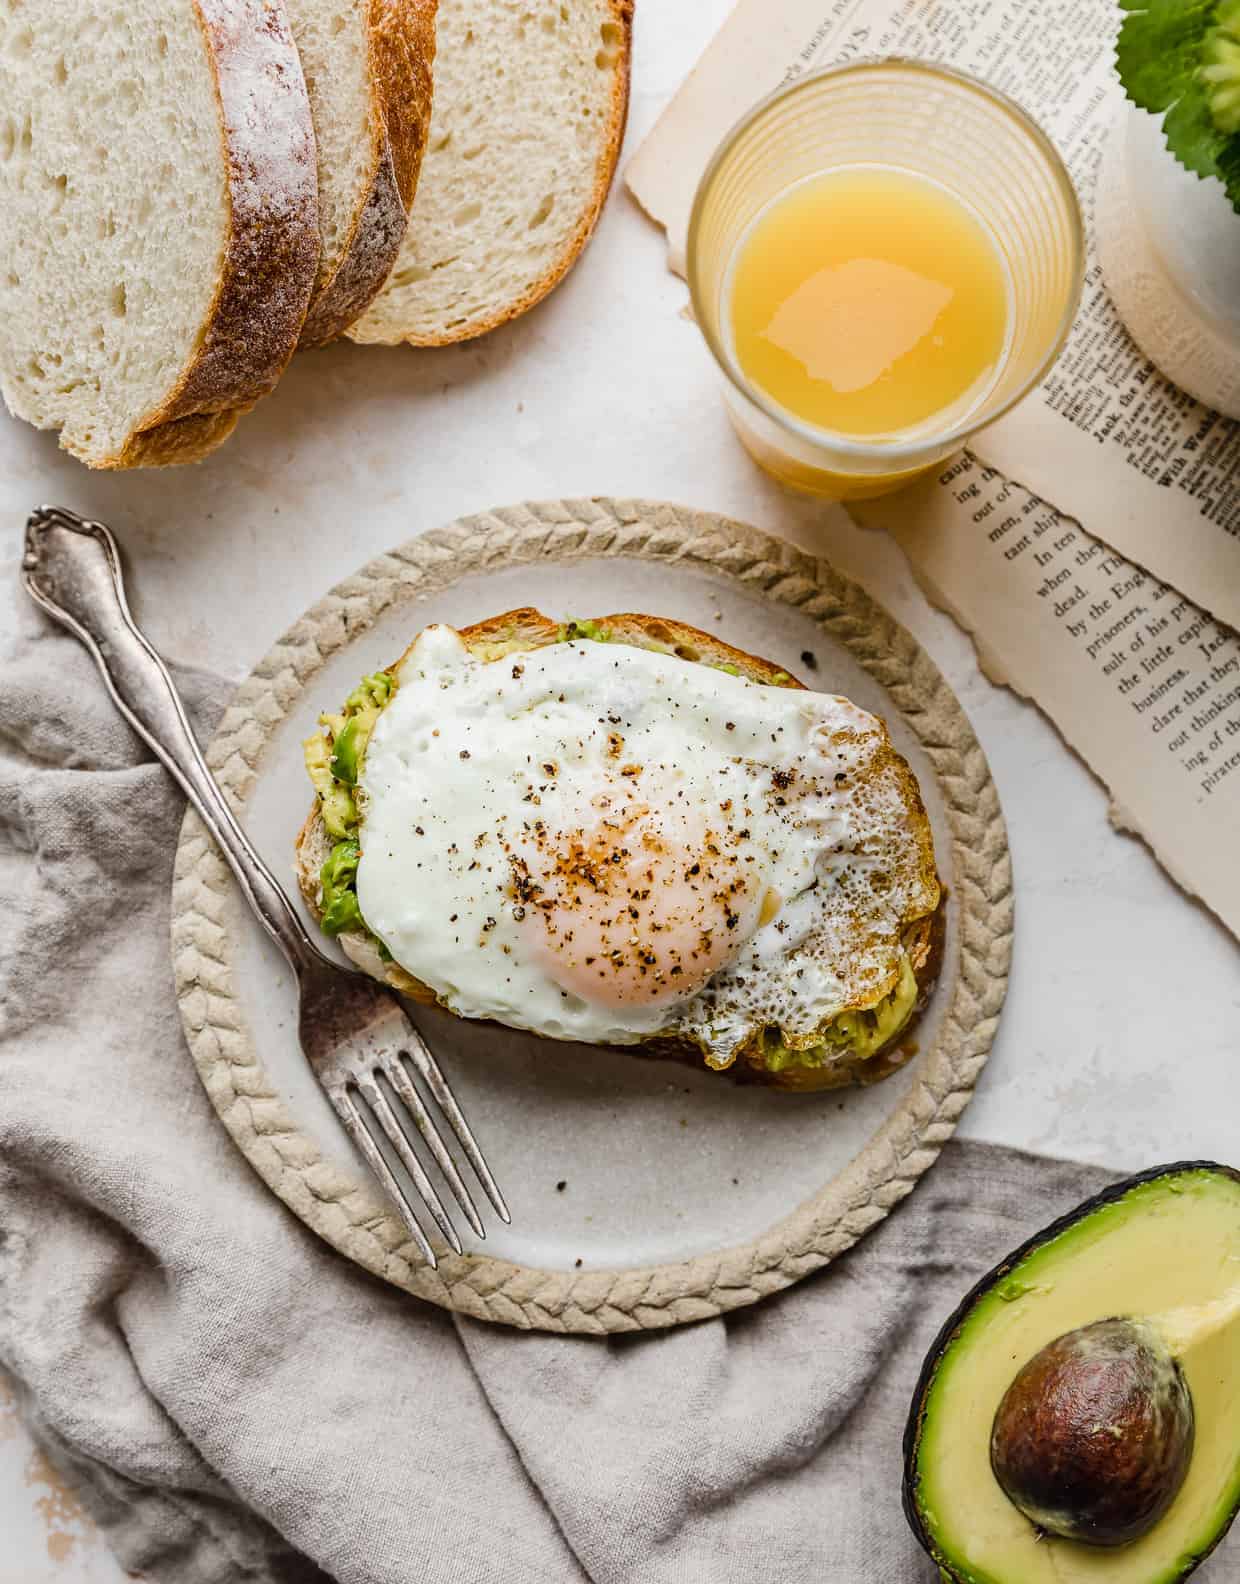 A slice of bread with smashed avocado and a cooked egg on it. 